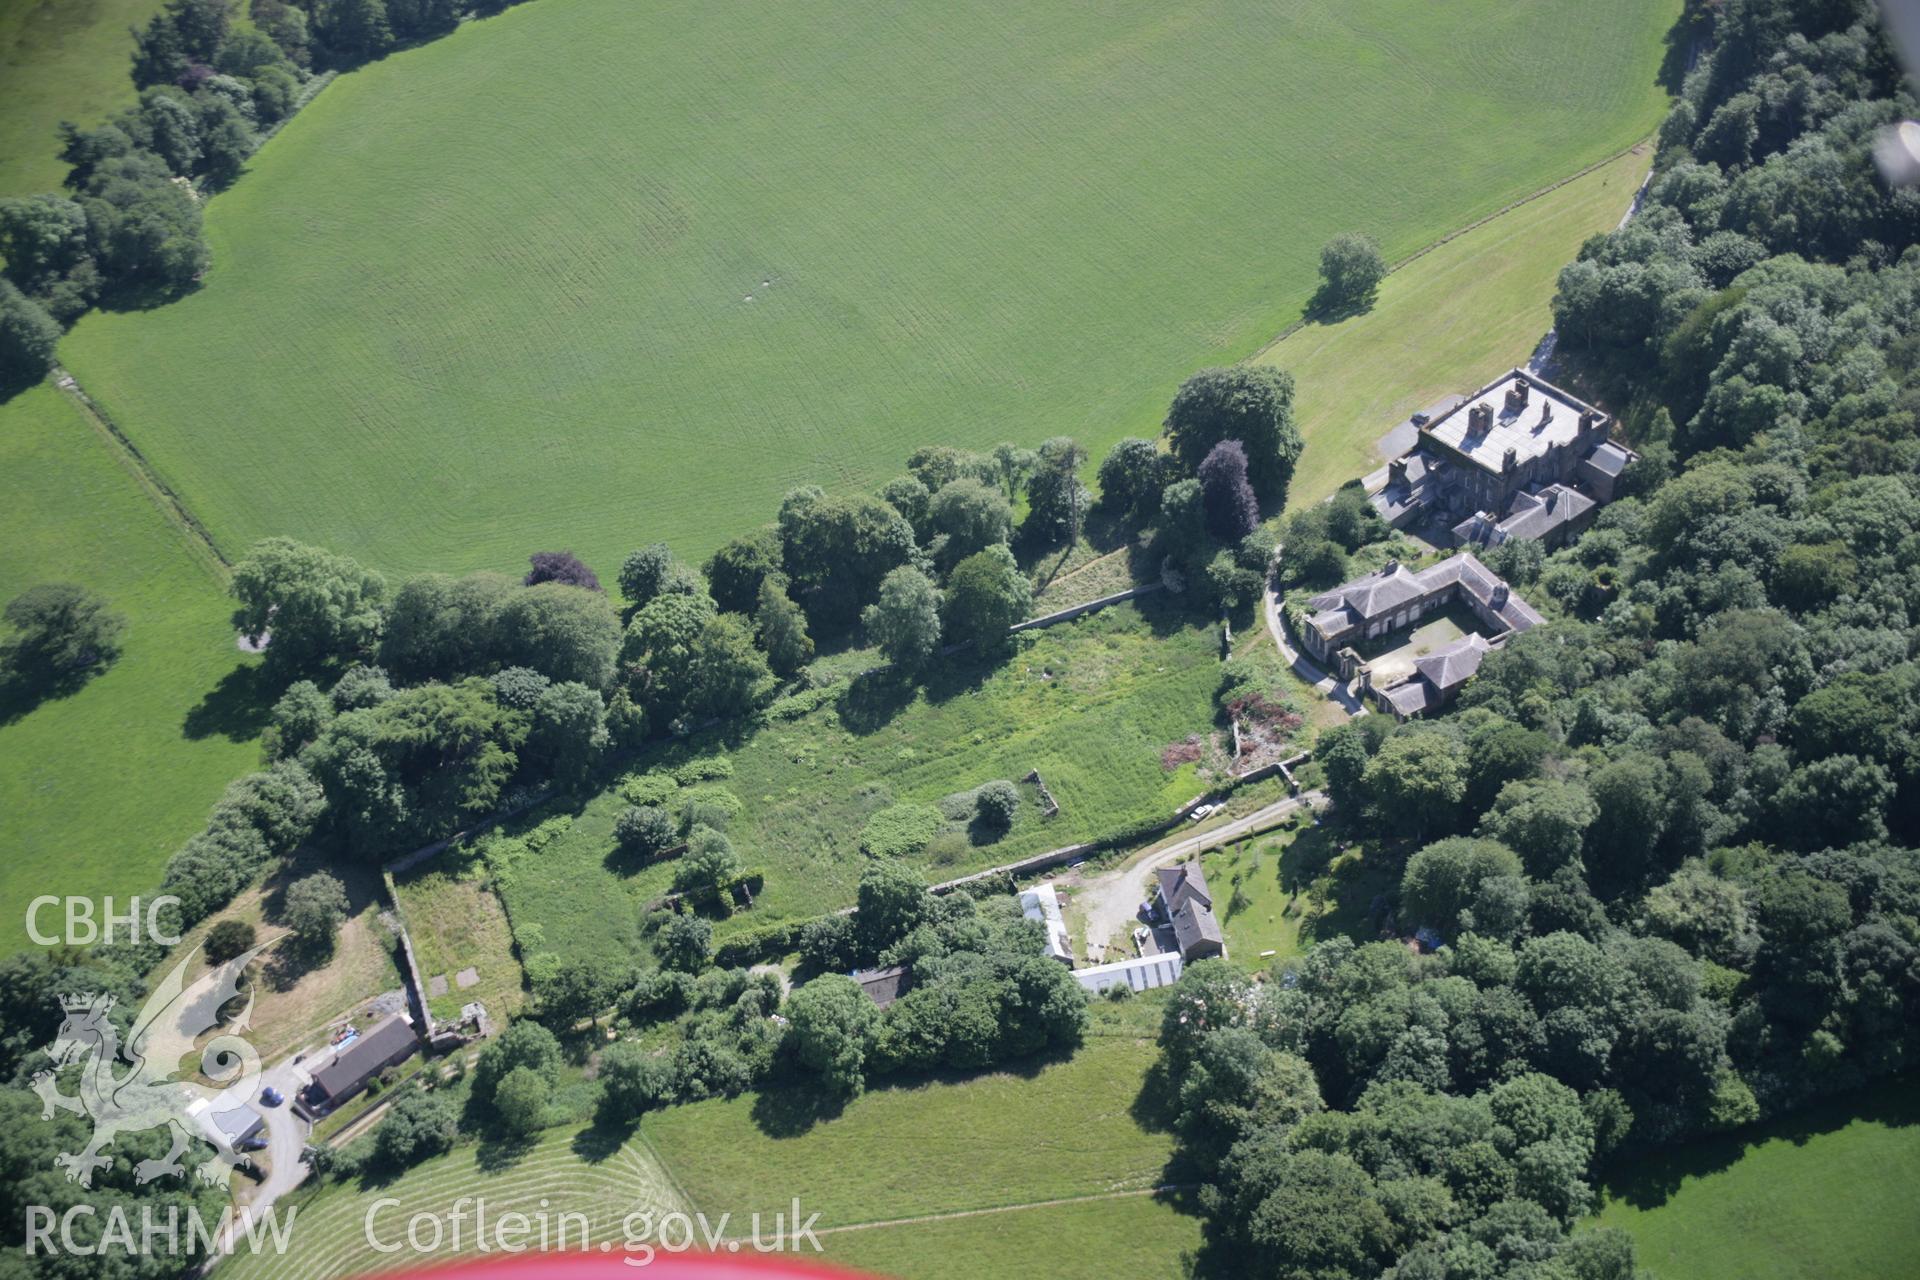 RCAHMW colour oblique aerial photograph of Nanteos Mansion and Stables, Llanfarian, in general view from the north-east. Taken on 23 June 2005 by Toby Driver